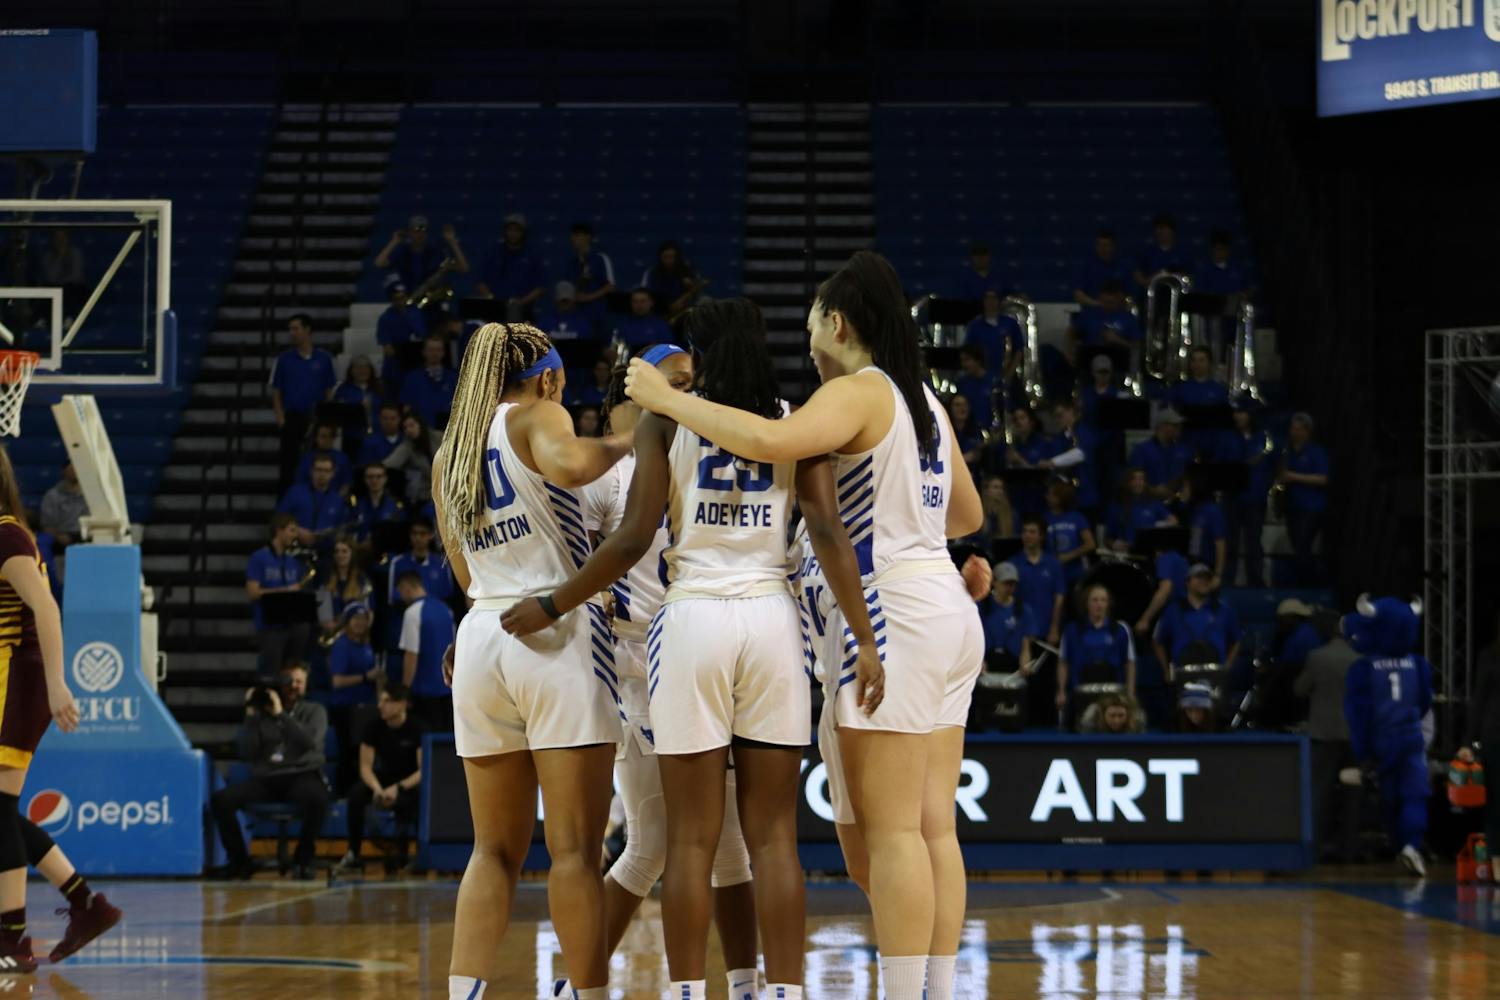 The women's basketball team gather in a team huddle before the start of a game.&nbsp;